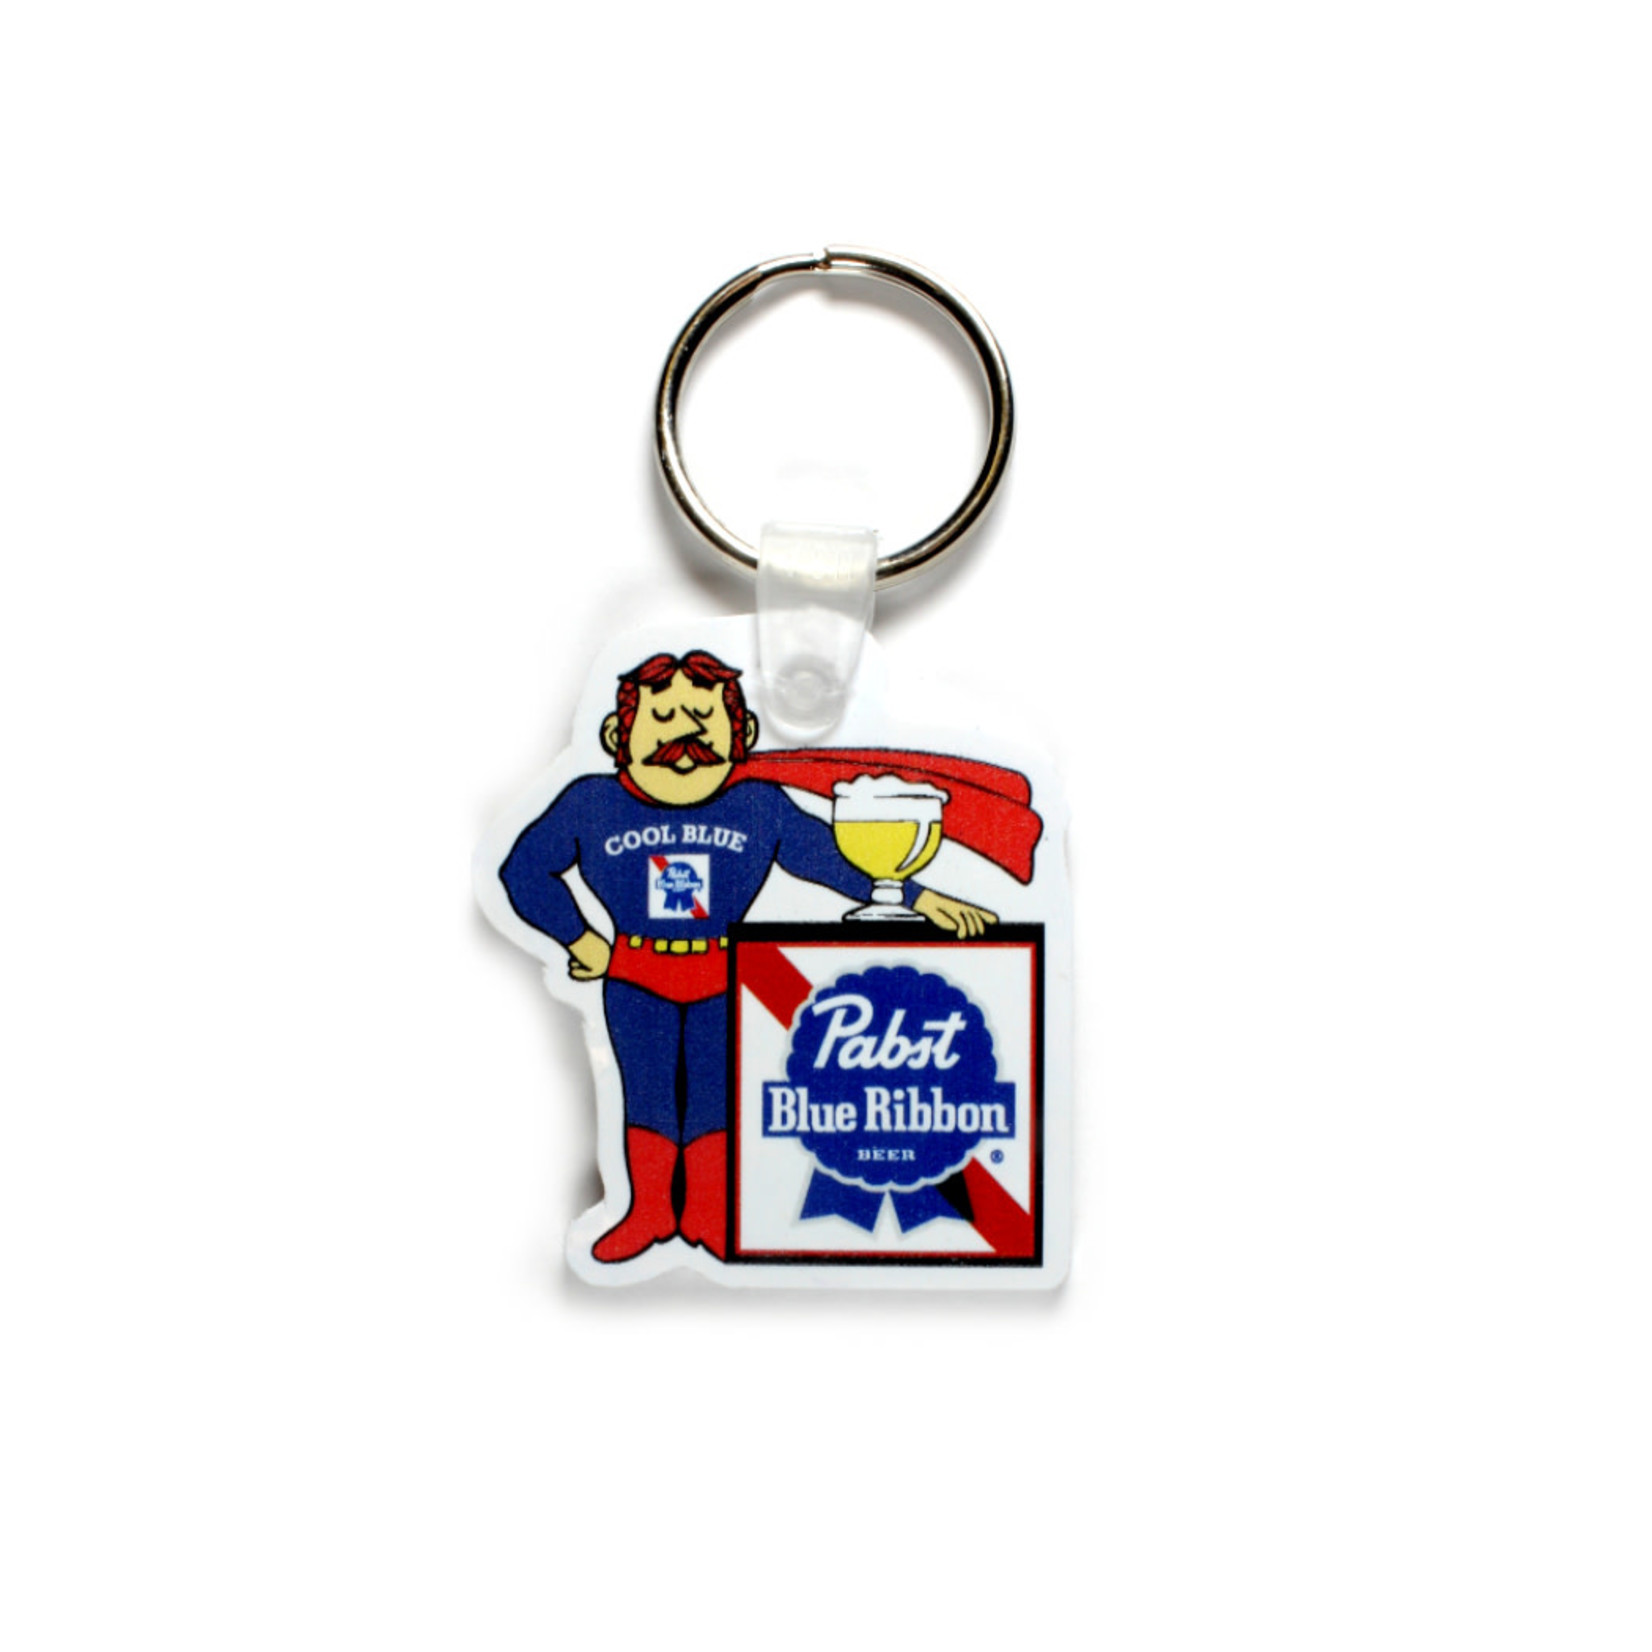 Pabst Pabst Cool Blue Keyring